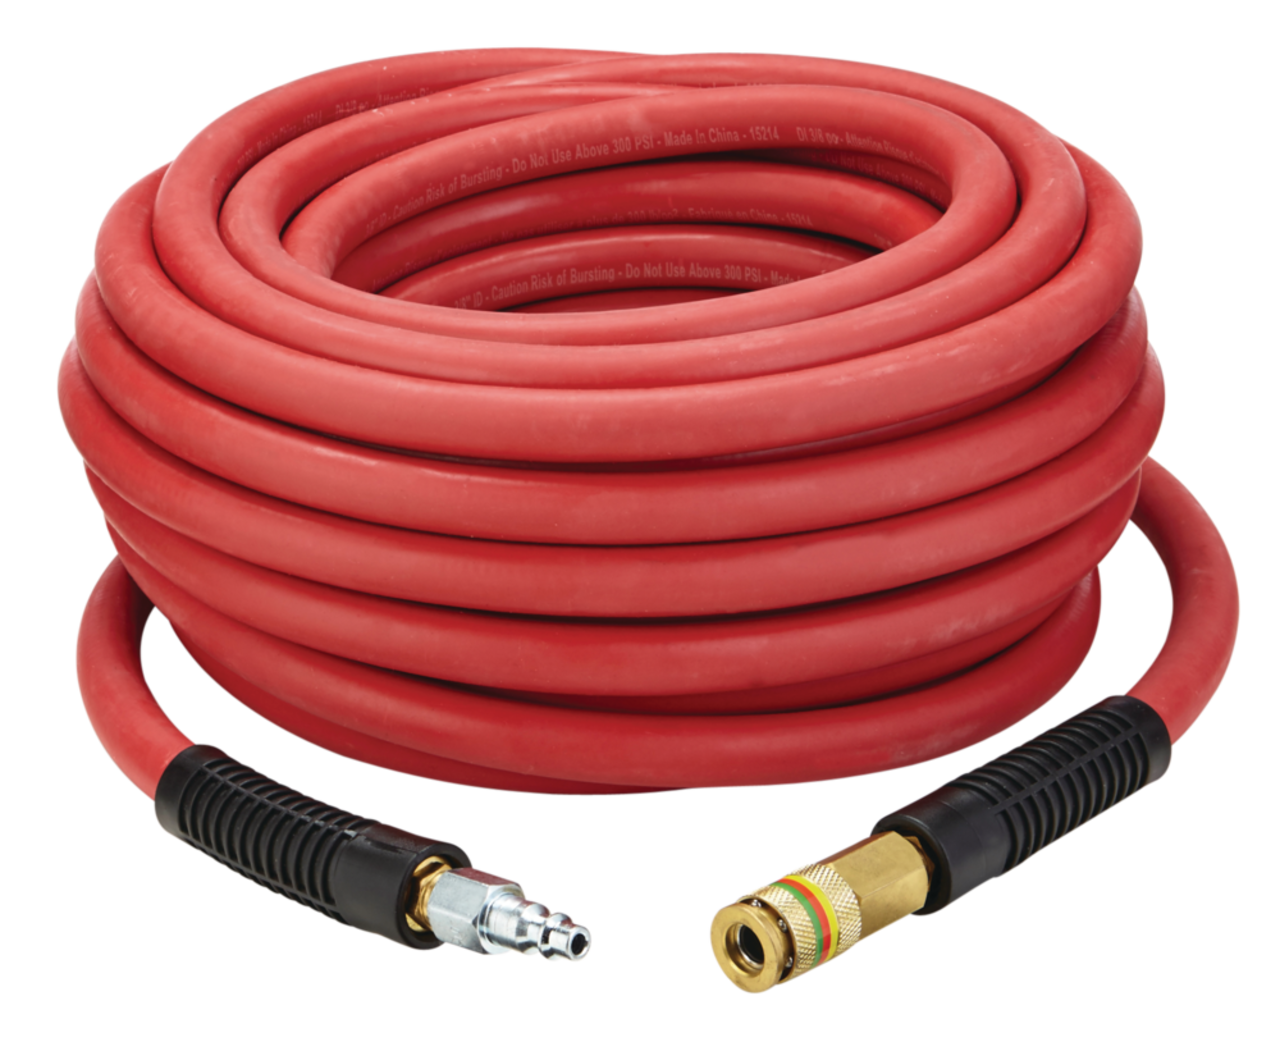 MAXIMUM All-Weather Rubber Air Hose, 3/8-in x 50-ft